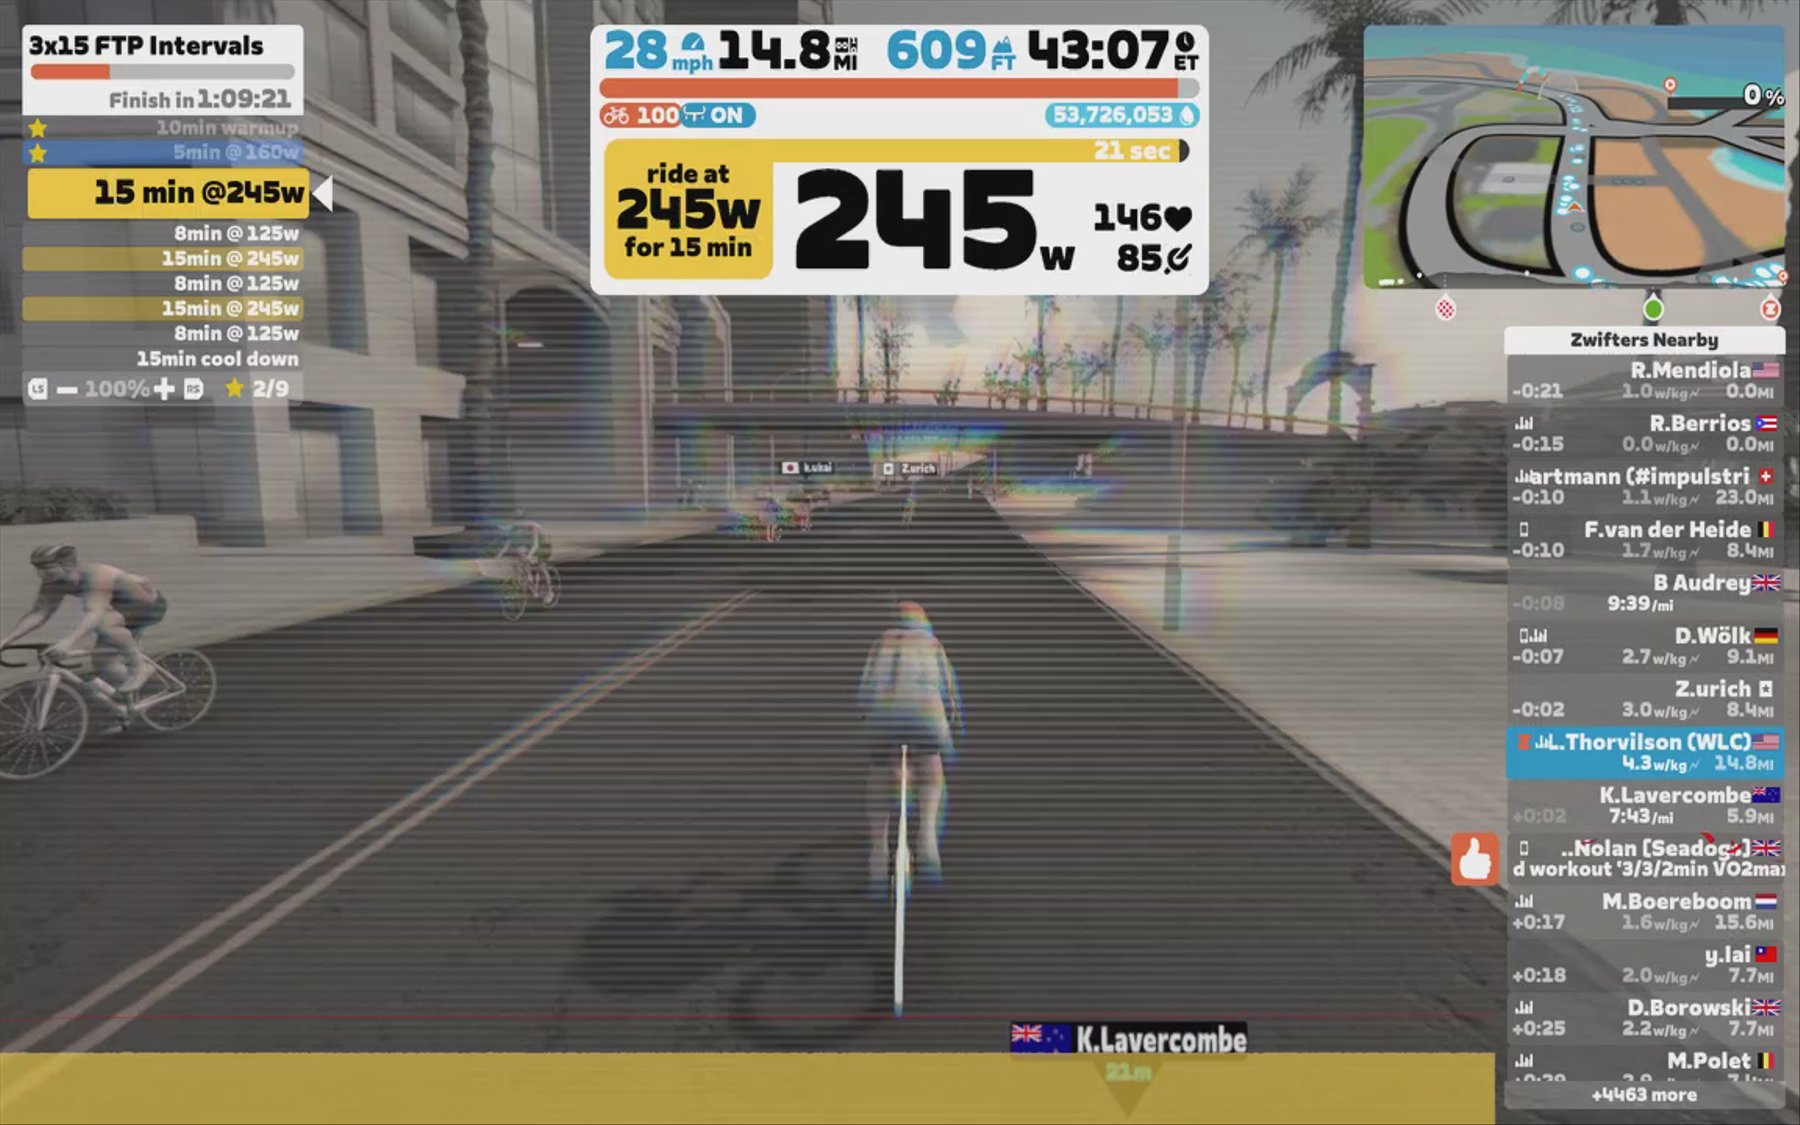 Zwift - 3x15 FTP Intervals on Flat Route in Watopia